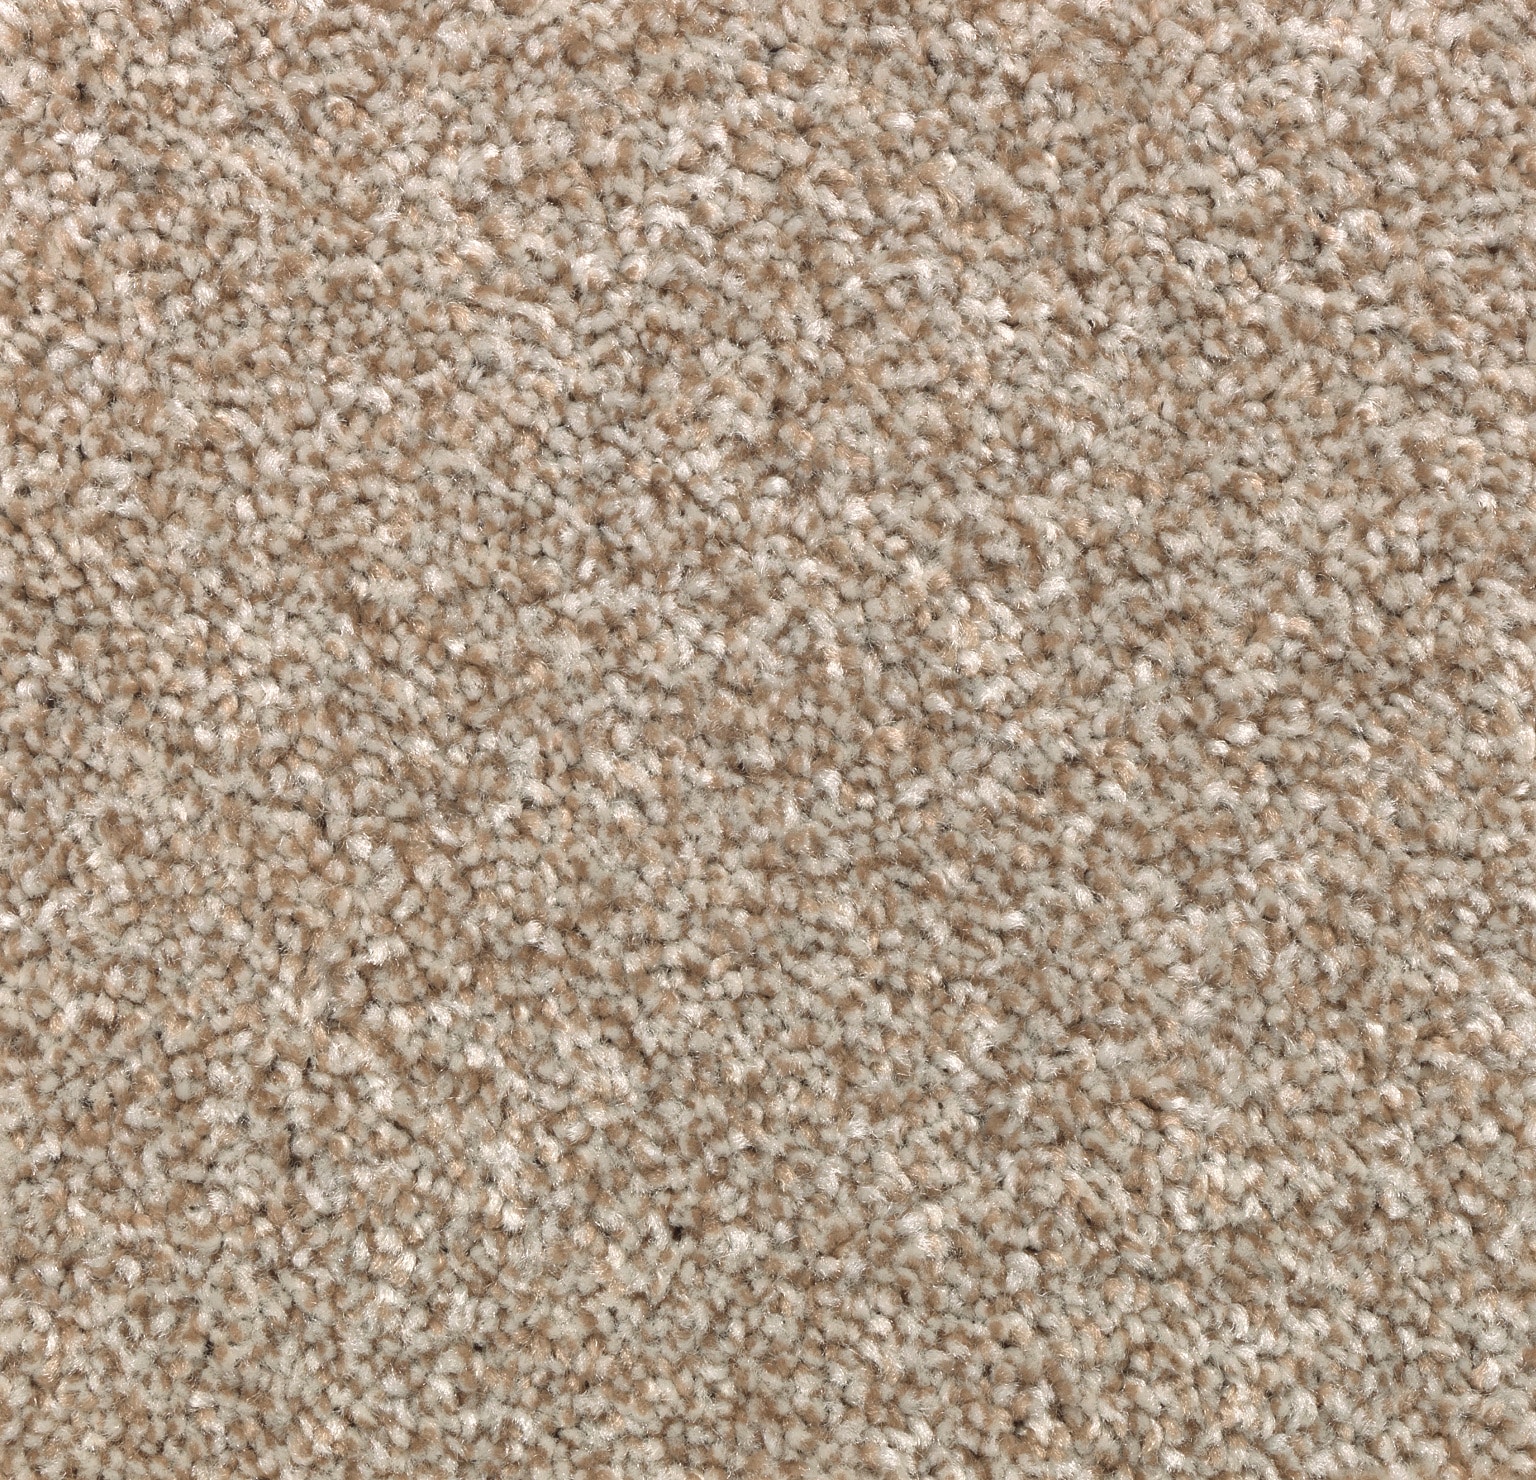 at (Sample) Carrington the STAINMASTER Step II Durable Samples Textured Carpet Carpet Beige department in